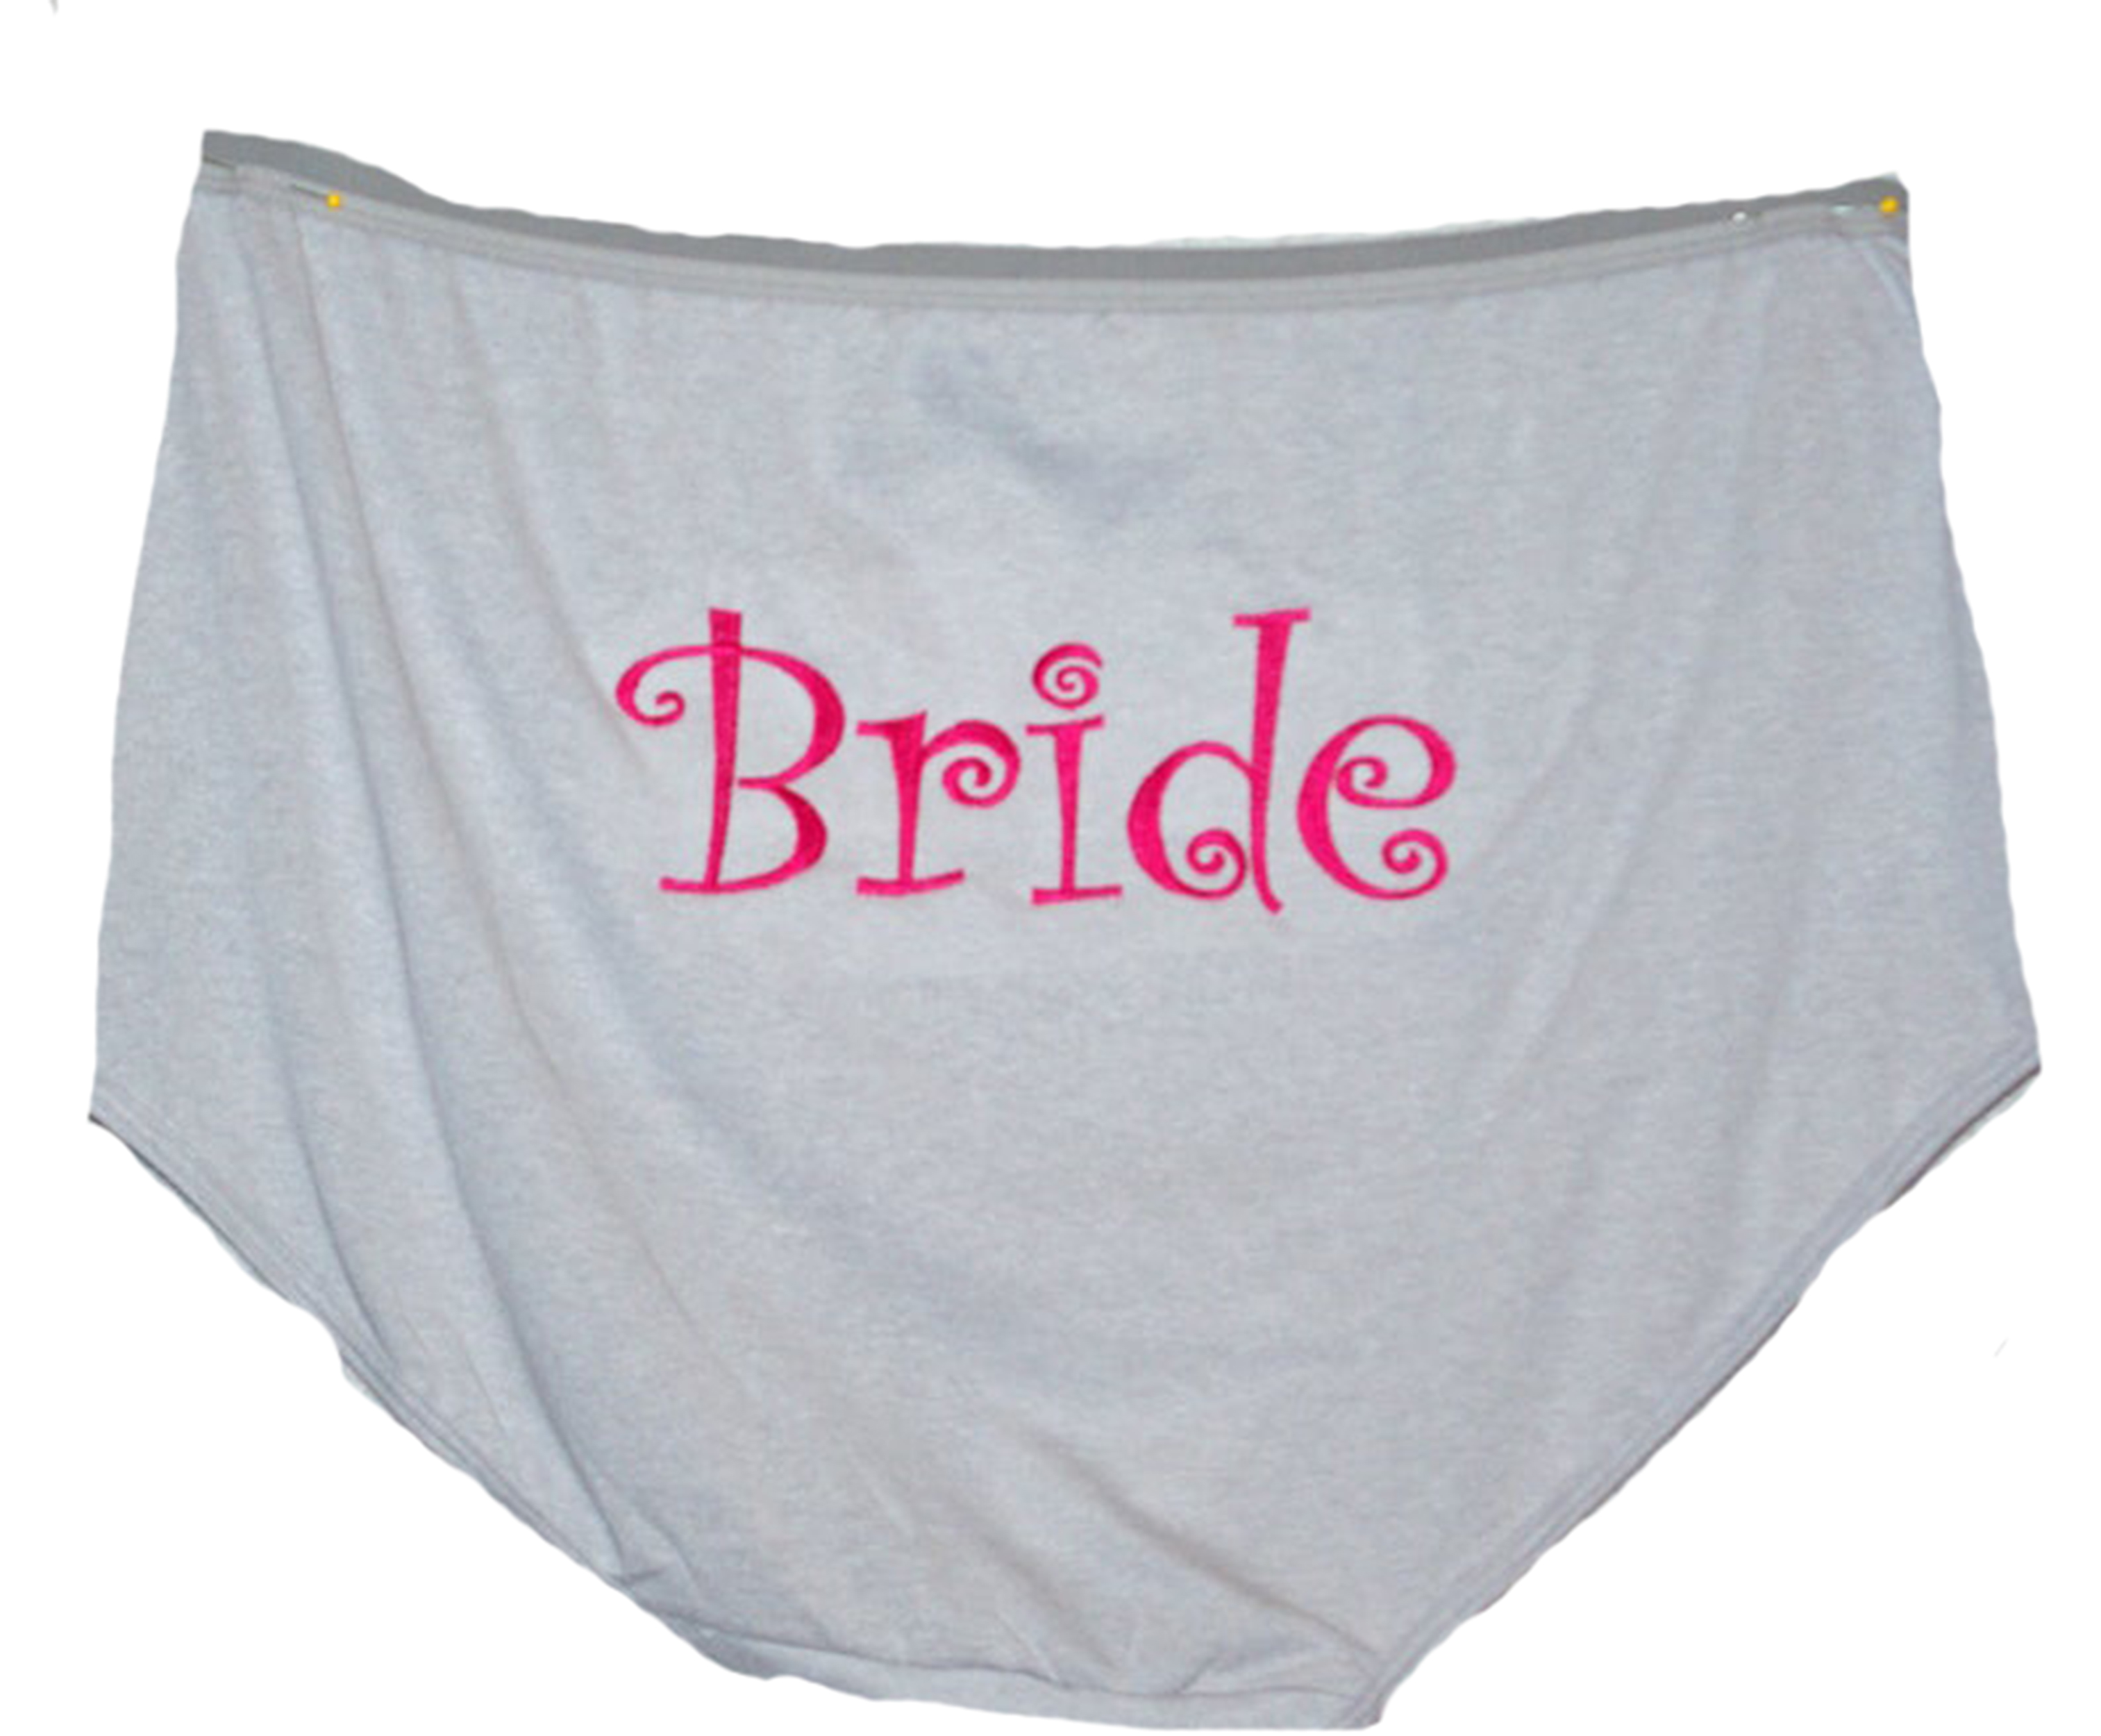 Granny Panties, Large, Gag Gift Exchange, Bridal Shower, Grandma, Mimi,  Bride, Guy, Hubby, Wife, Grammy, Mammy, Personalized, AGFT 054 